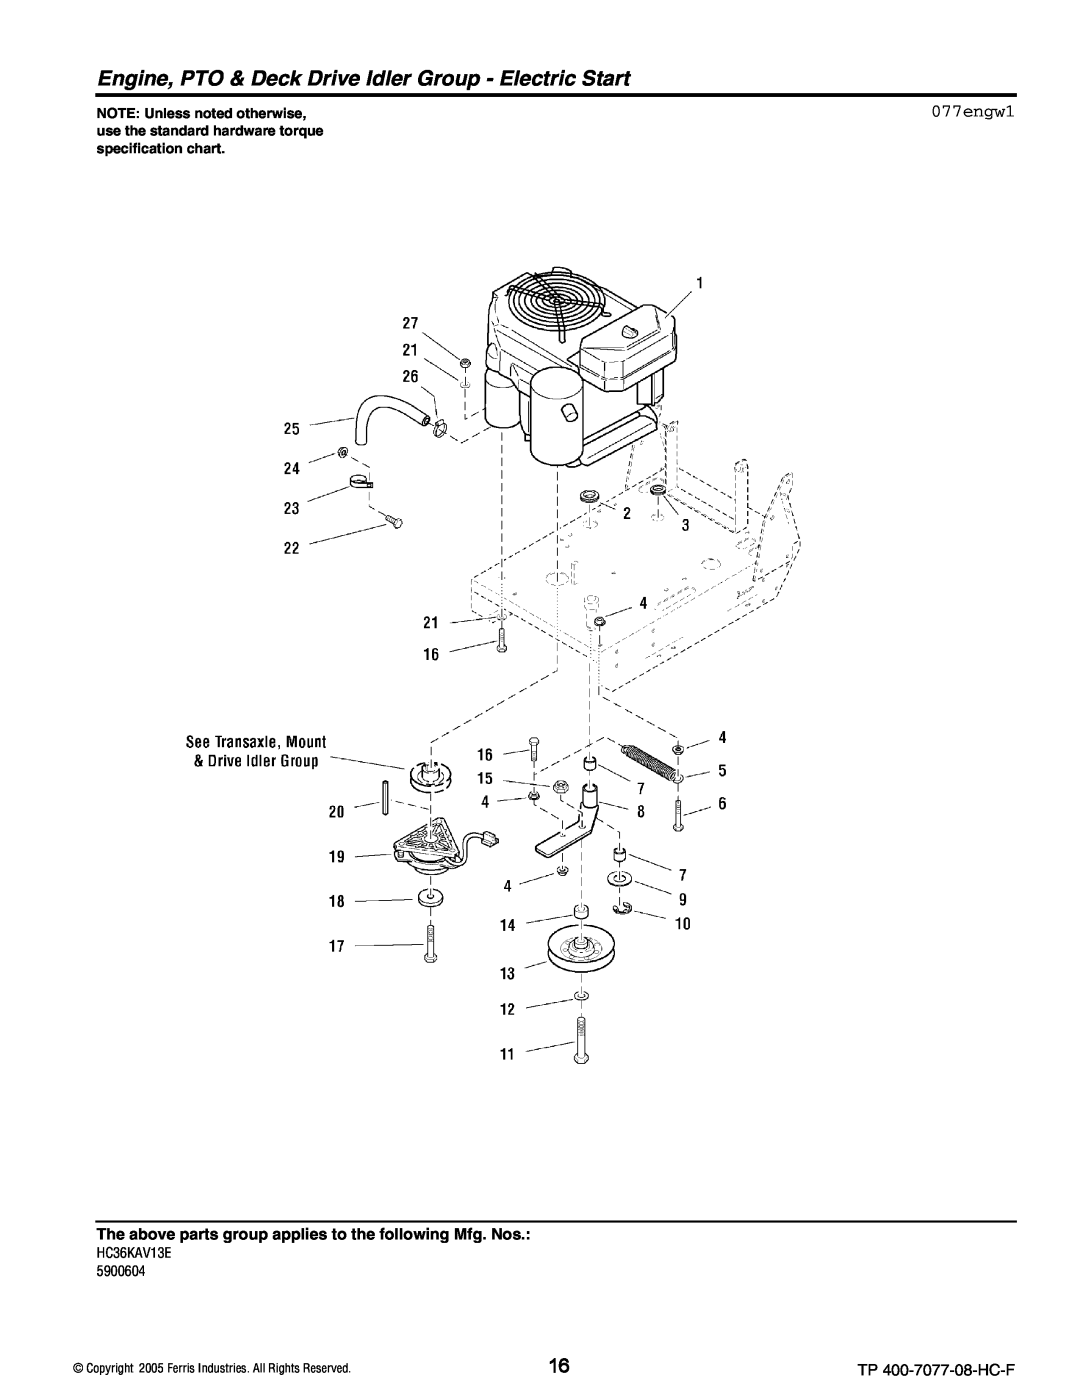 Ferris Industries HC32KAV13 077engw1, NOTE Unless noted otherwise, use the standard hardware torque, specification chart 